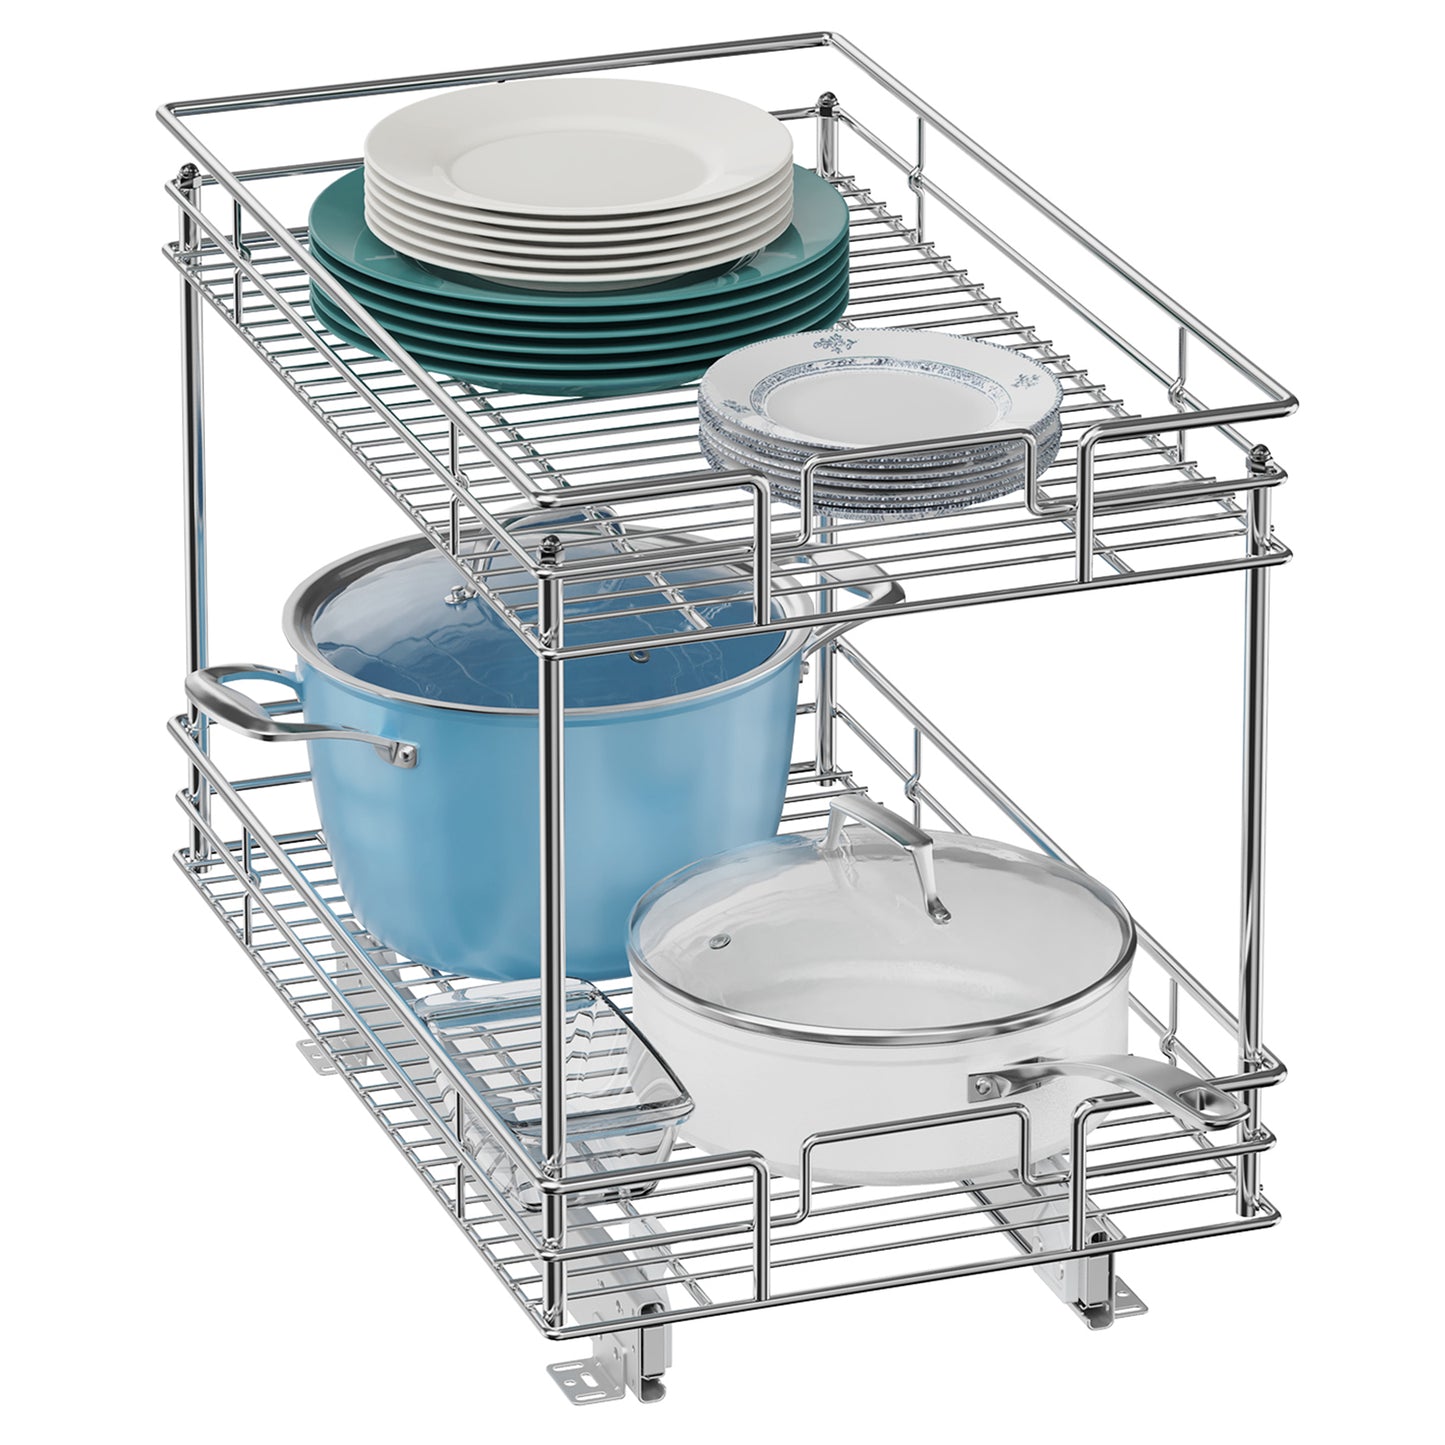 2-Tier Pull-Out Cabinet Organizer RB2 – Homeibro